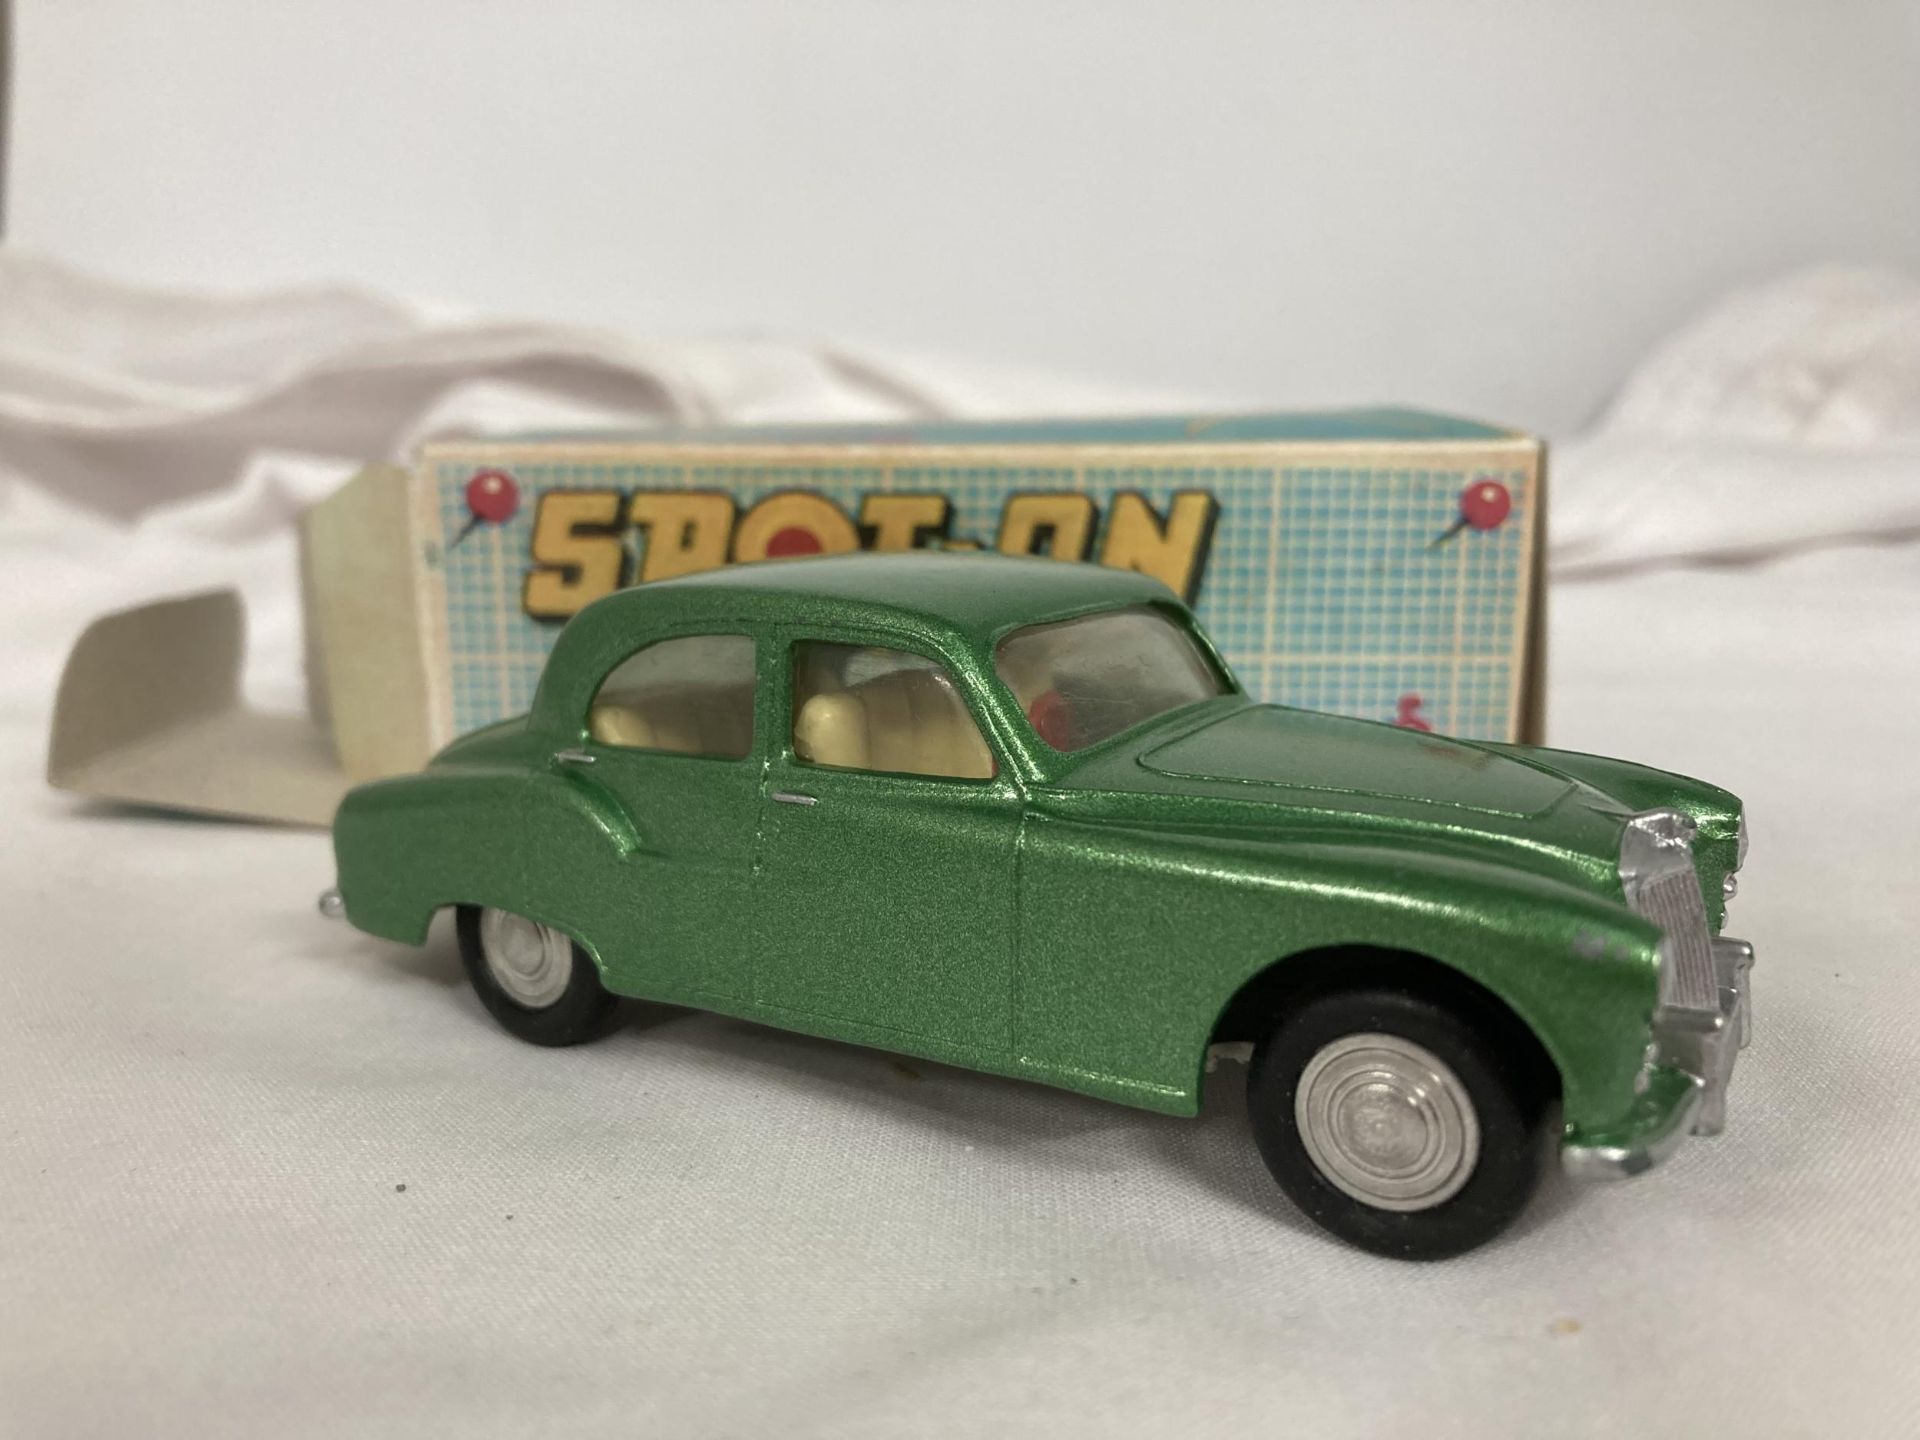 TWO SPOT ON BOXED MODELS NO. 219 - AN AUSTEN HEALEY SPRITE MARK III AND AN ARMSTRONG SIDDELEY - Image 2 of 3